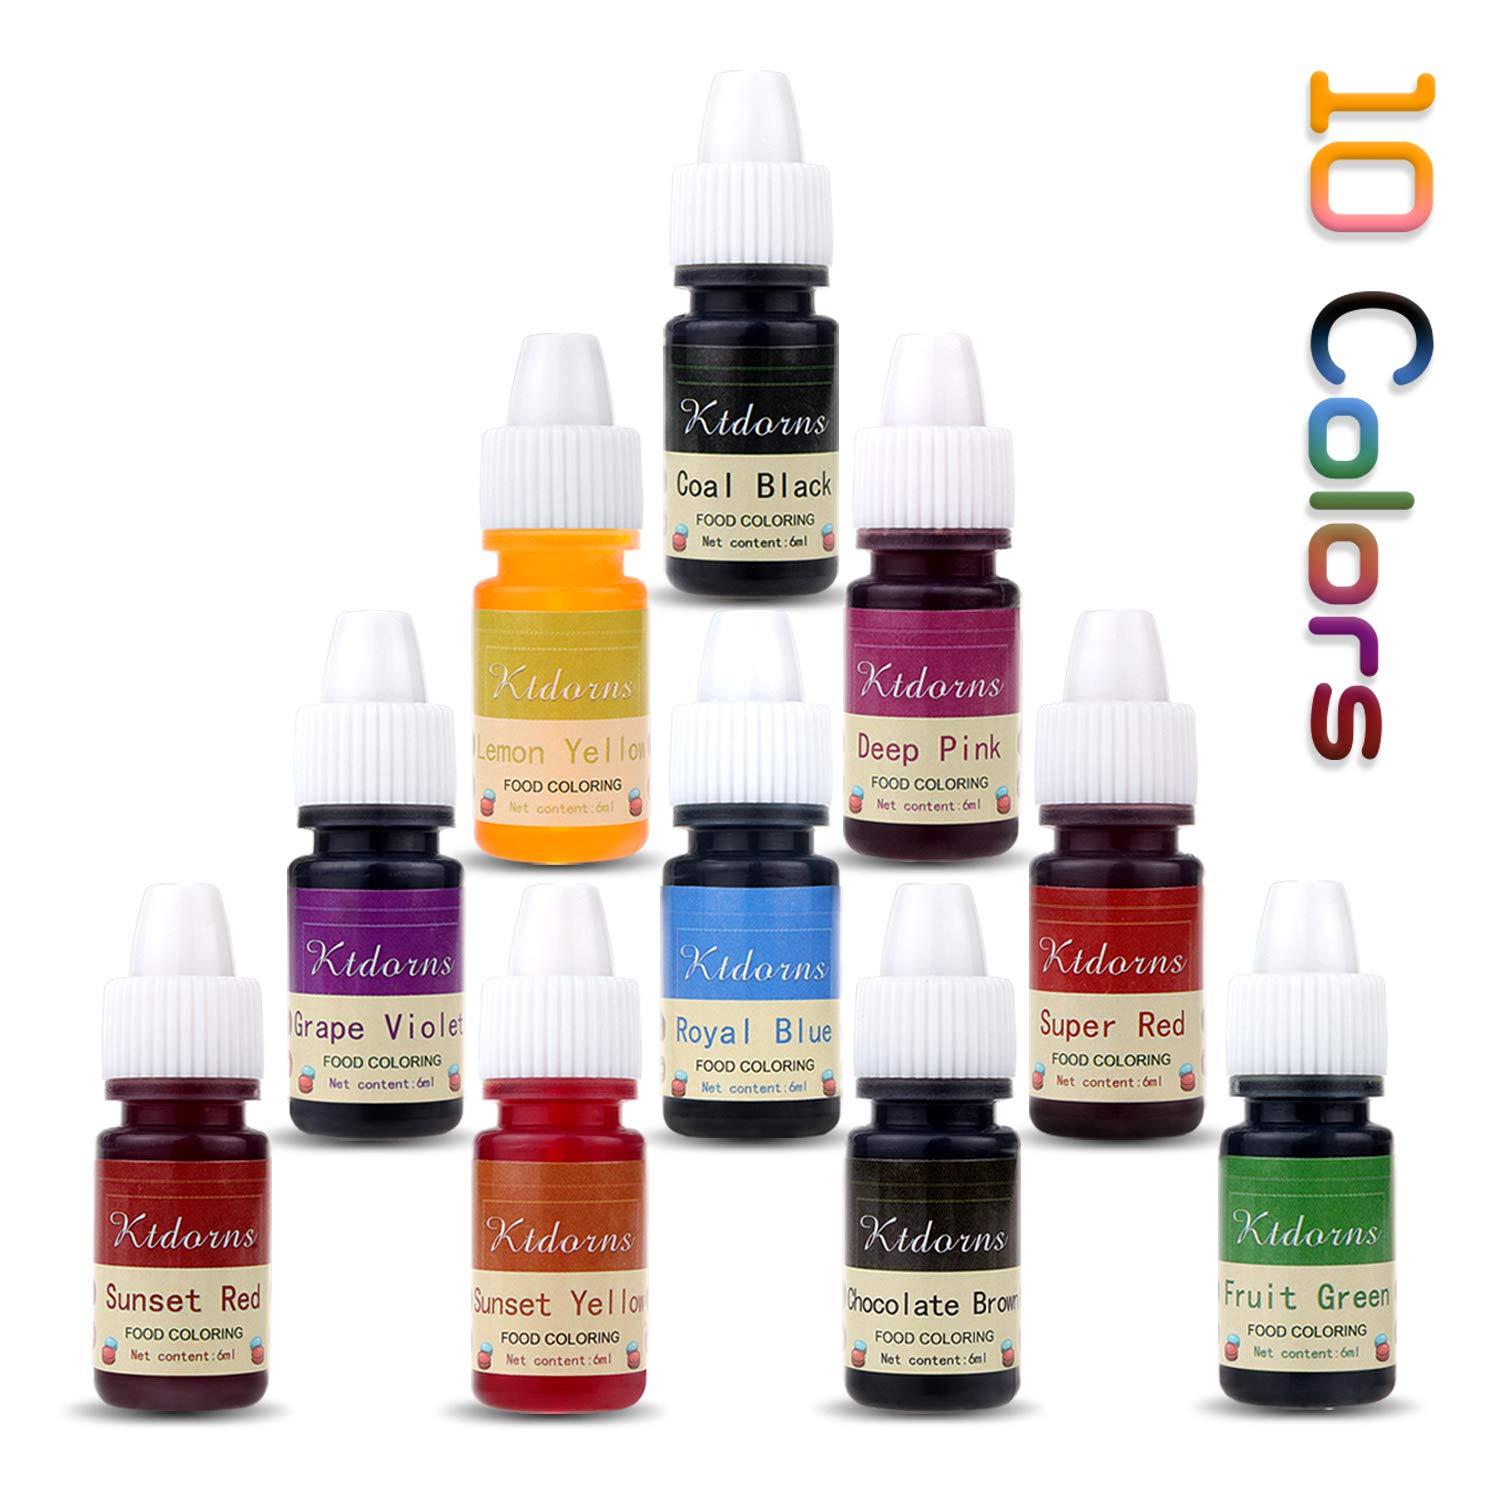 Food Coloring - 10 Color Cake Food Coloring Liquid Variety Kit for Baking, Decorating,Fondant and Cooking, Slime Making Supplies Kit - 25 fl oz (6ml)